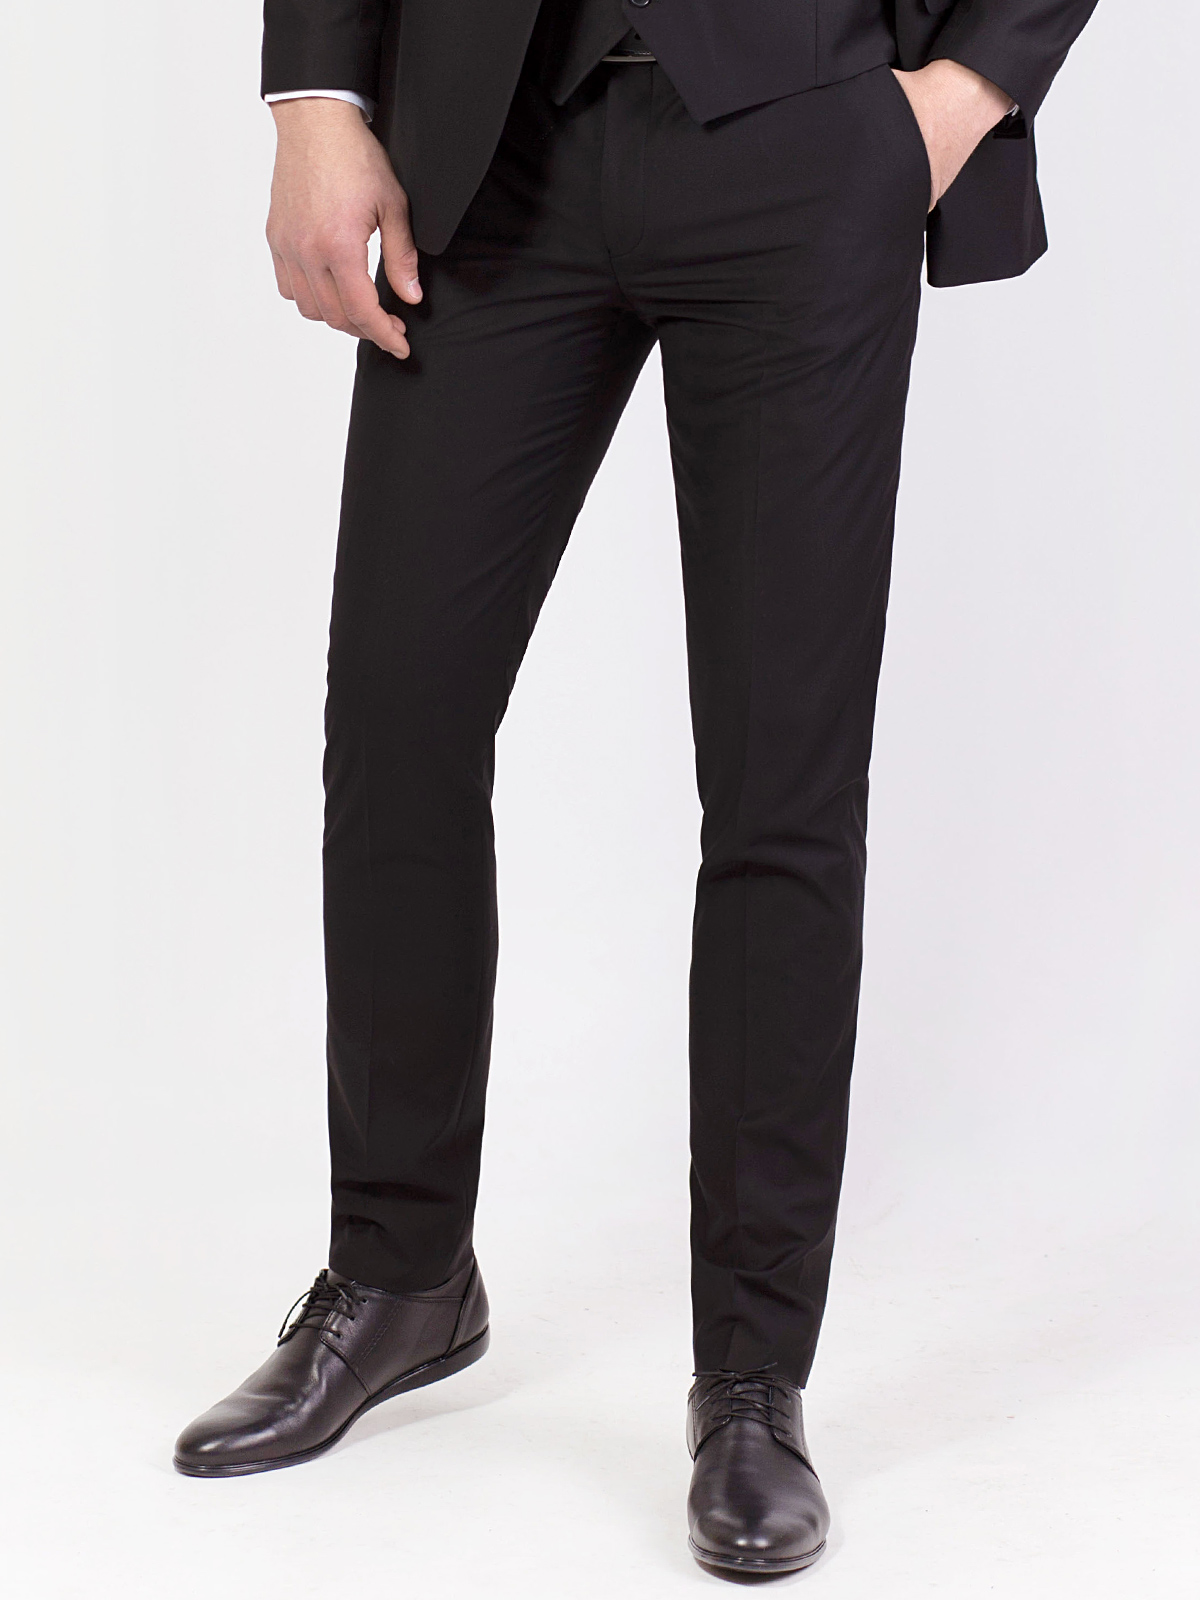 Fitted classic trousers in black - 63302 € 51.74 img2